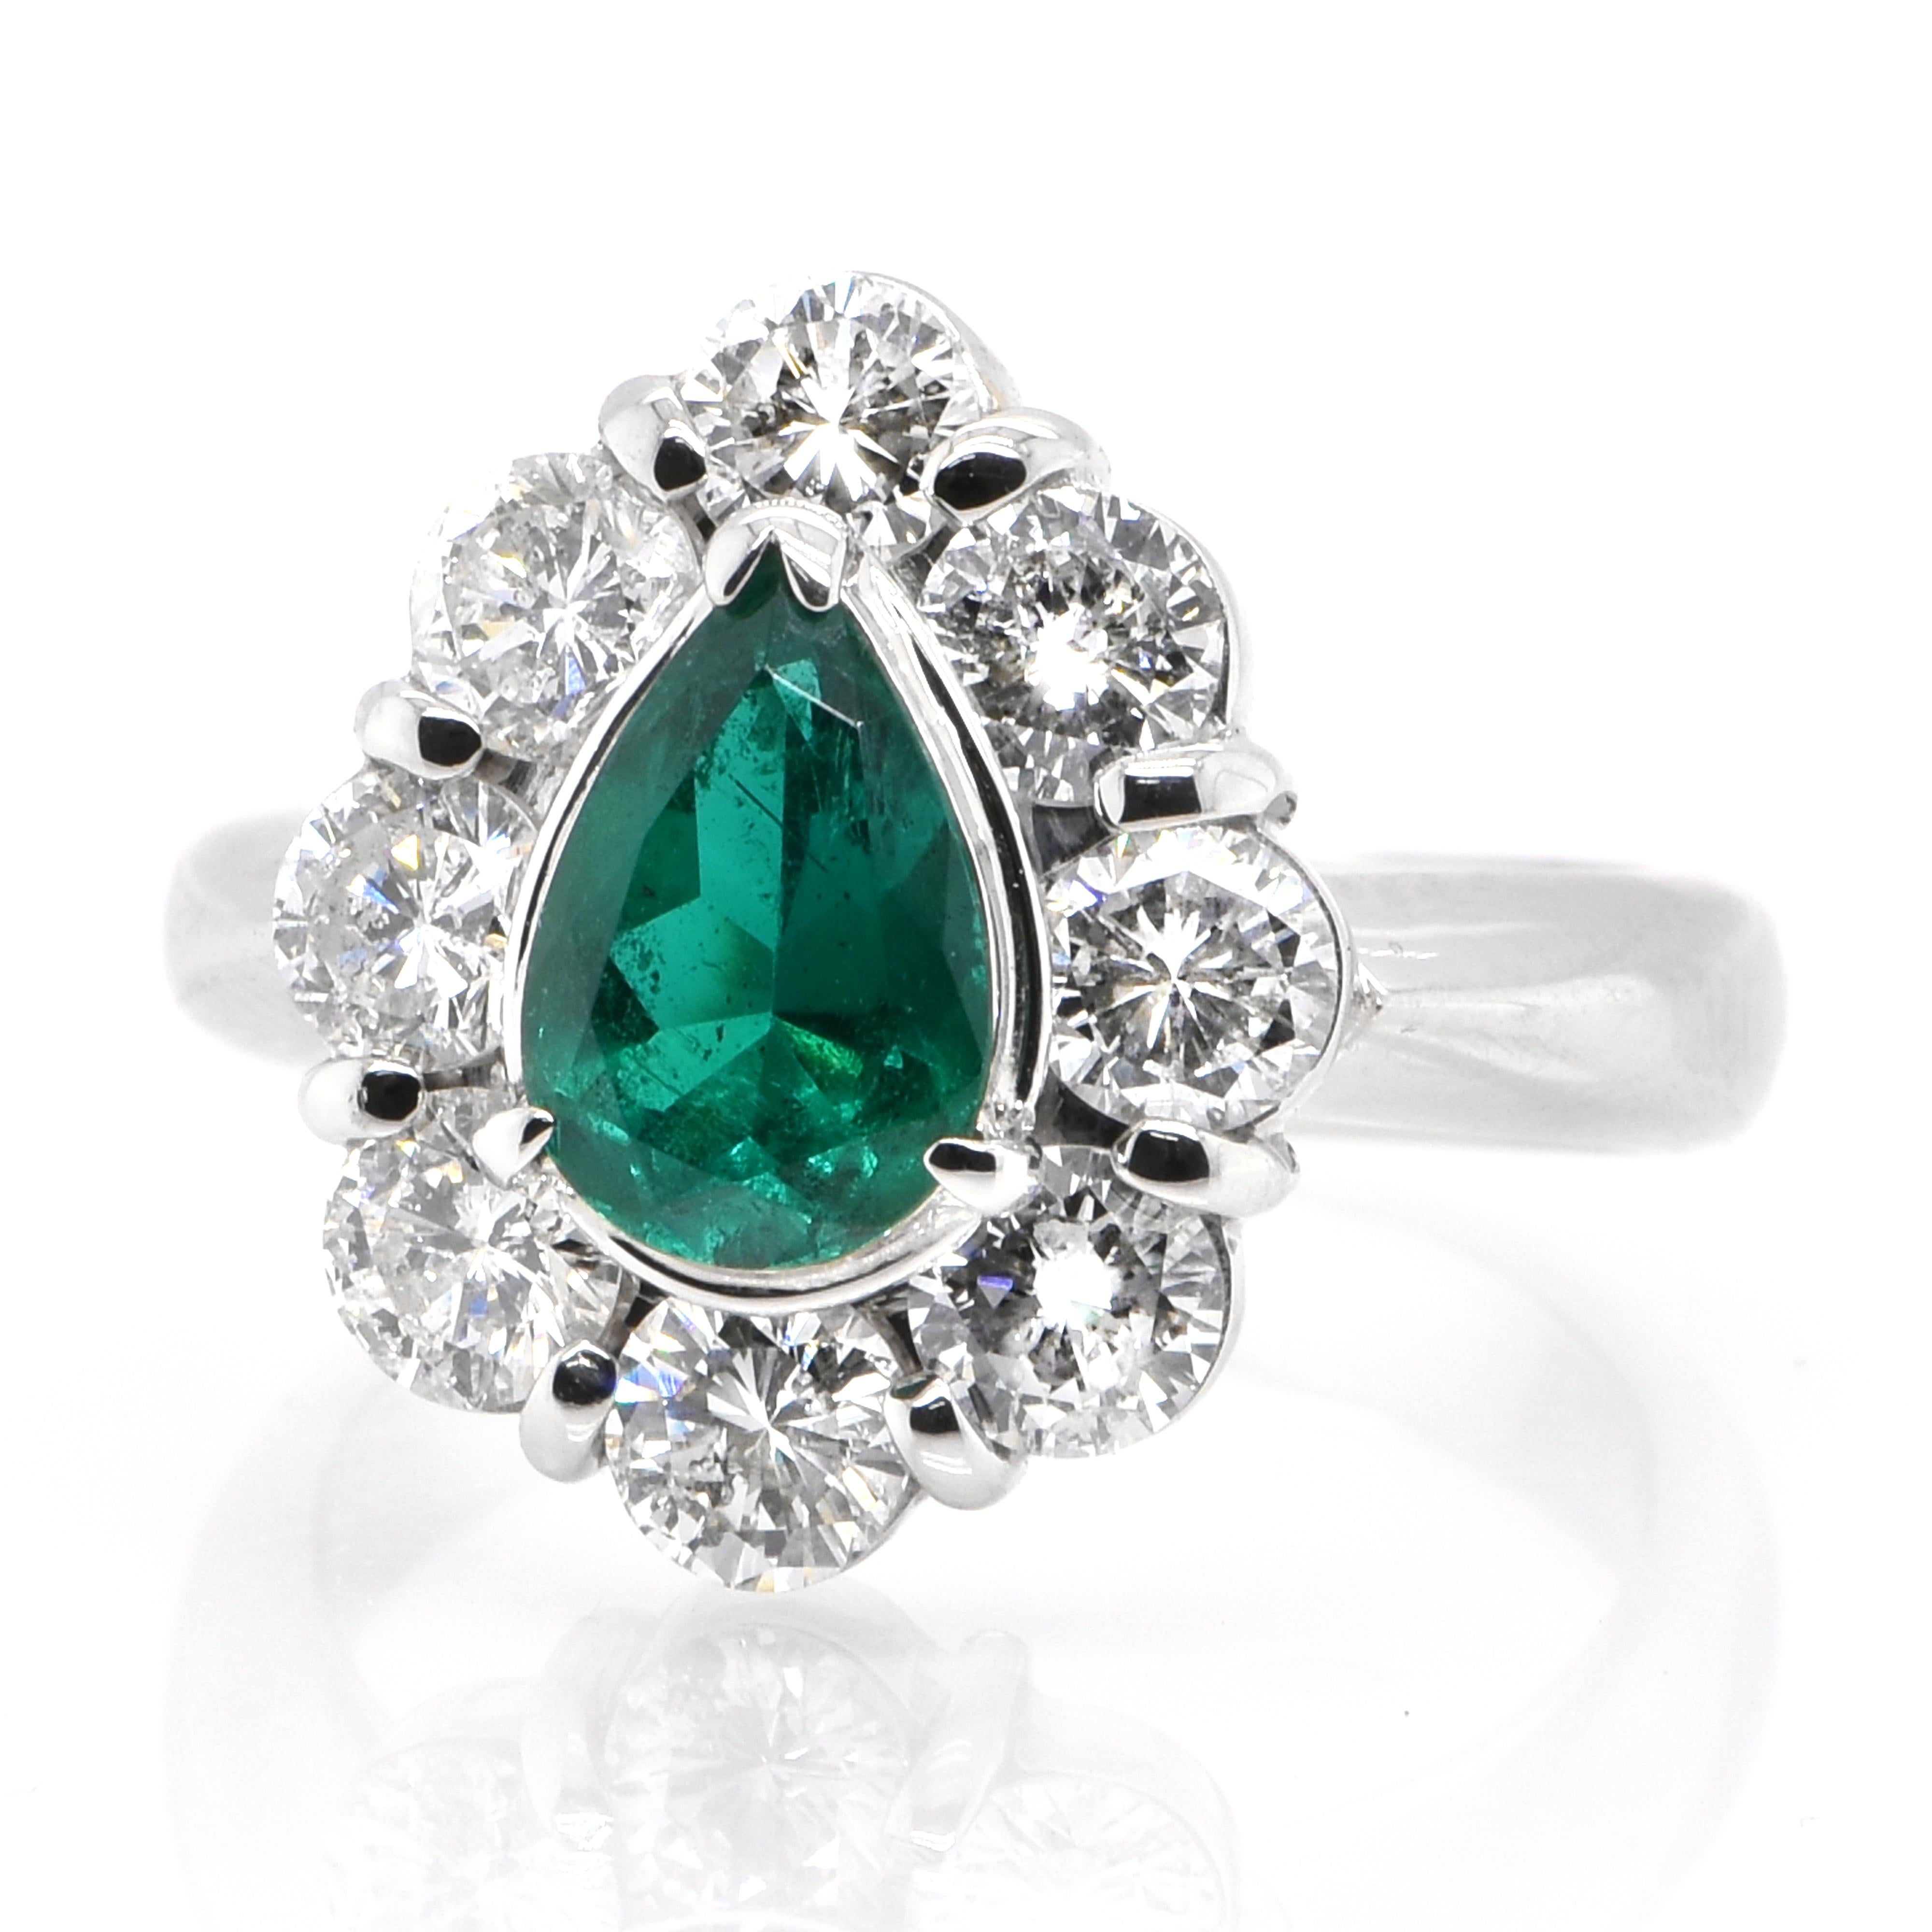 A stunning ring featuring a 0.98 Carat Natural Colombian Emerald and 1.85 Carats of Diamond Accents set in Platinum. People have admired emerald’s green for thousands of years. Emeralds have always been associated with the lushest landscapes and the